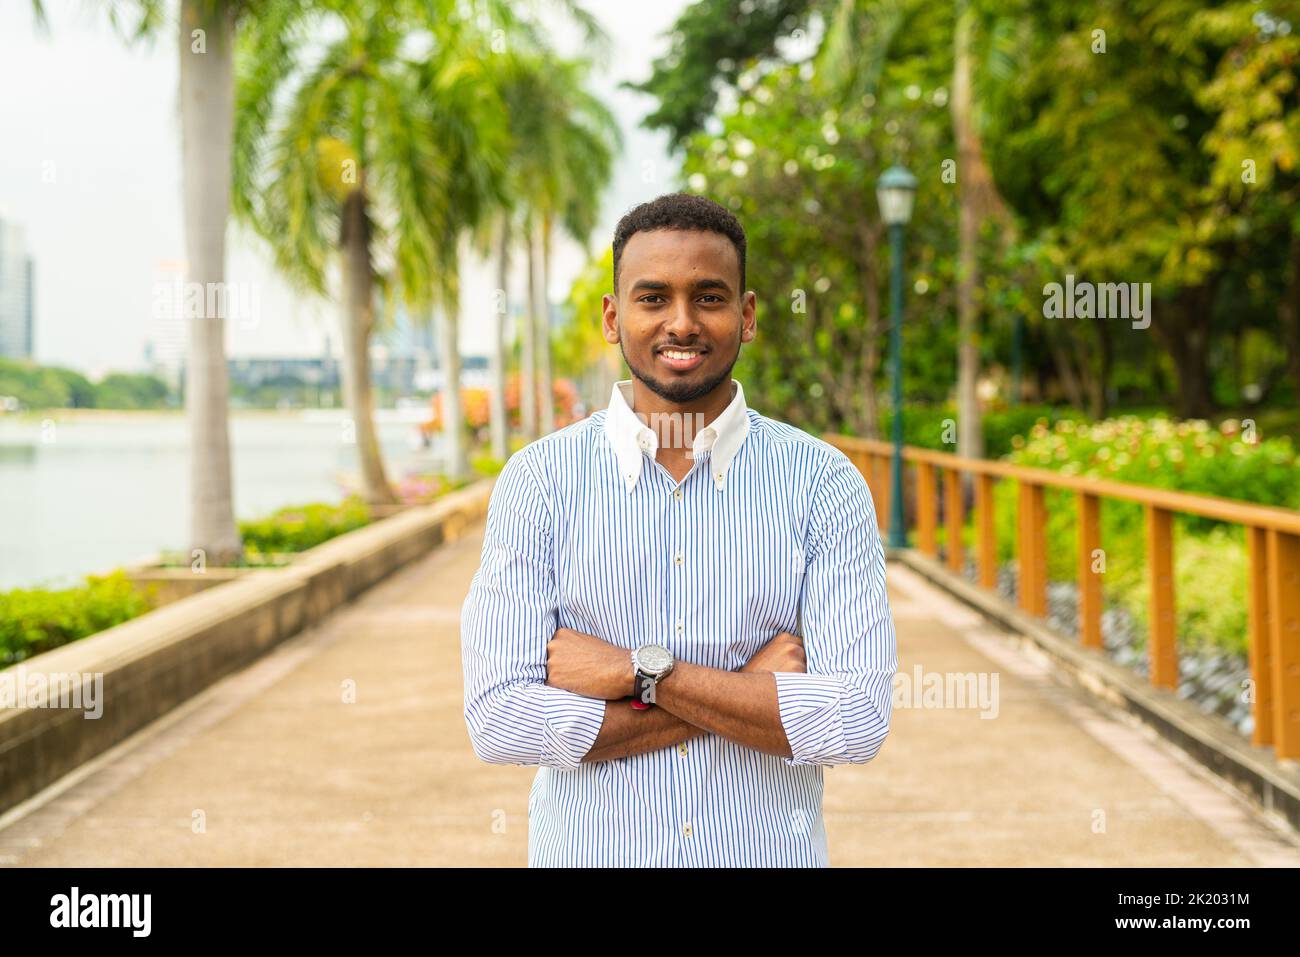 Portrait of handsome young black businessman at park outdoors during summer Stock Photo